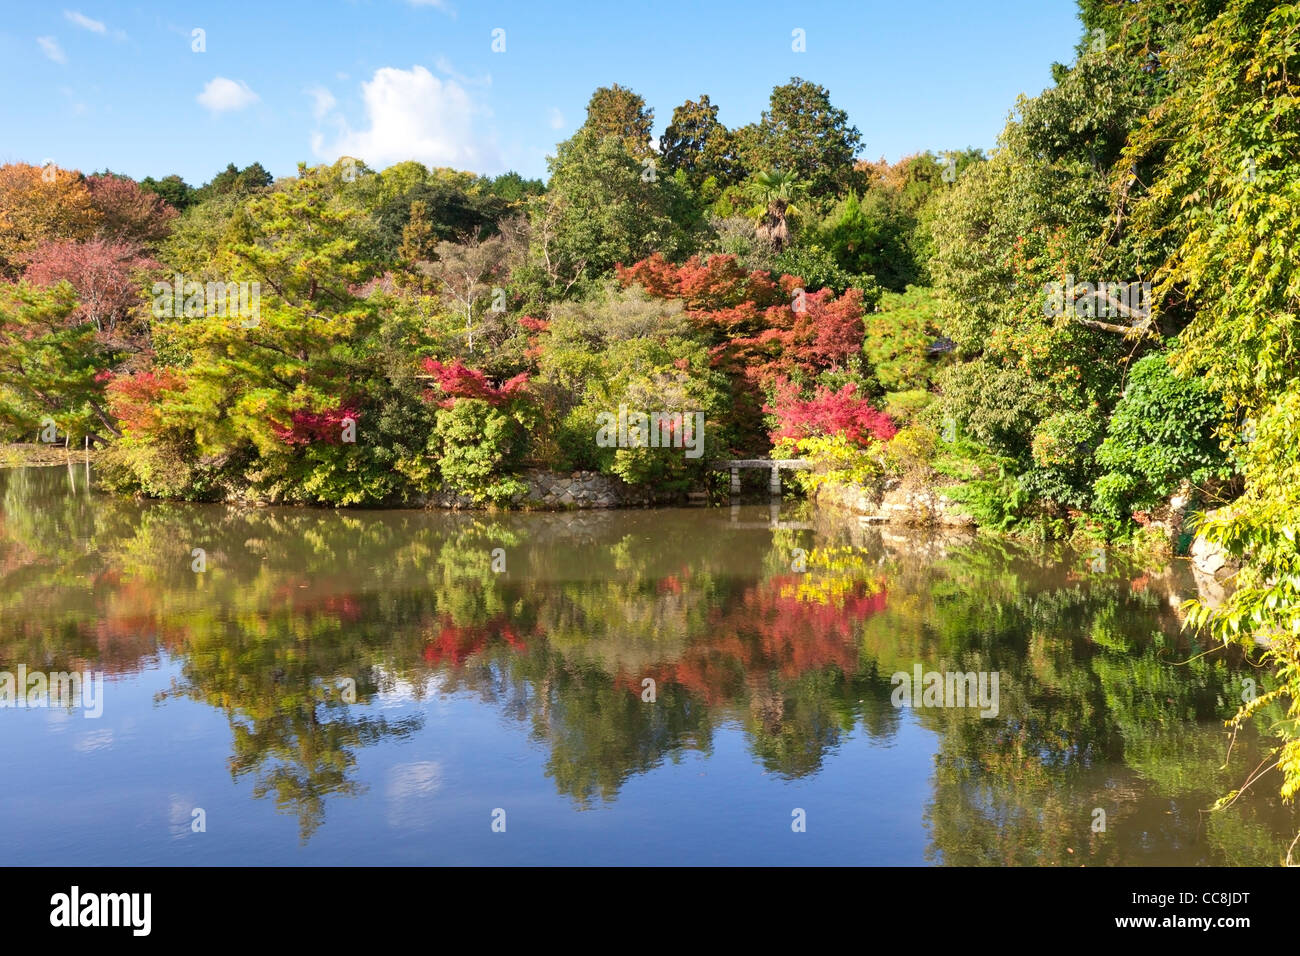 Reflection in Kyoyochi Pond in the grounds of Ryoan-ji temple, Kyoto, Japan, seen in Autumn. Stock Photo